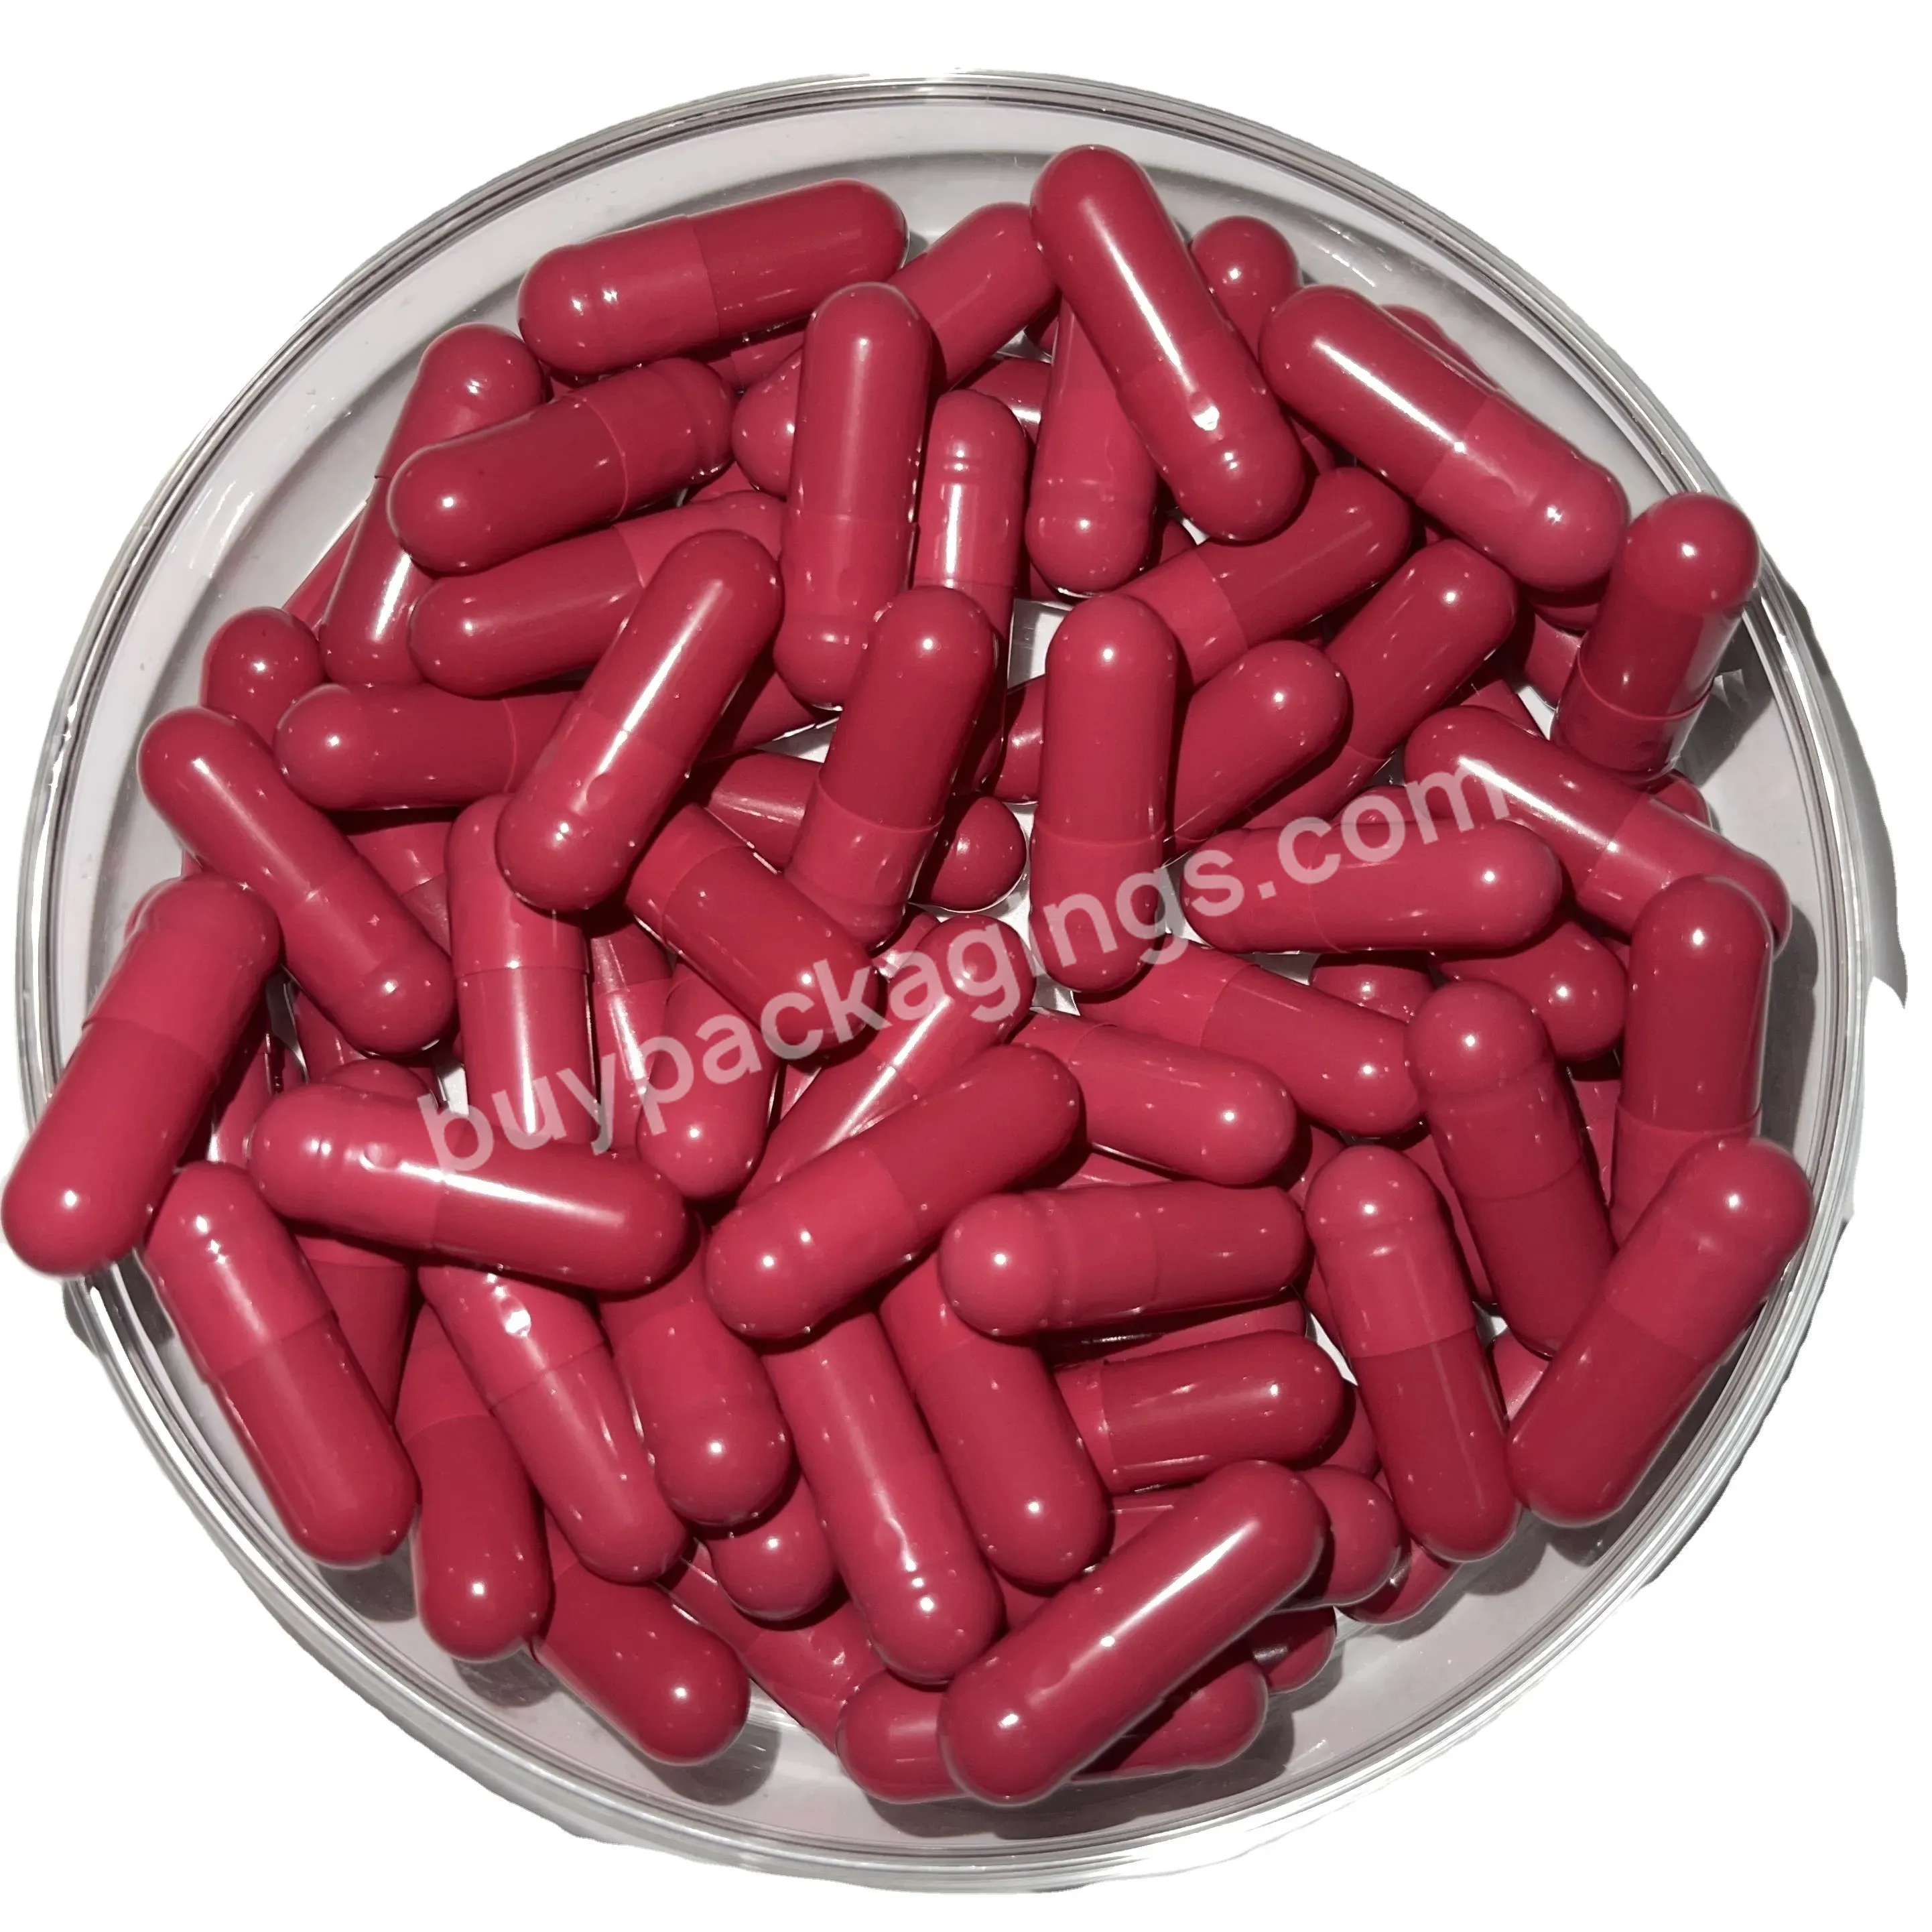 Wholesale Size 000 00 0 1 2 3 4 5 Medicinal Halal Gelatin Capsules Different Colors Or Hpmc Capsules - Buy Empty Gelatin Capsules Or Hpmc Capsules Size 00 0 1 2 3 4 5,Empty Gelatin Capsules Or Hpmc Capsules,Enteric Coated Capsule Empty Gelatin Capsules.